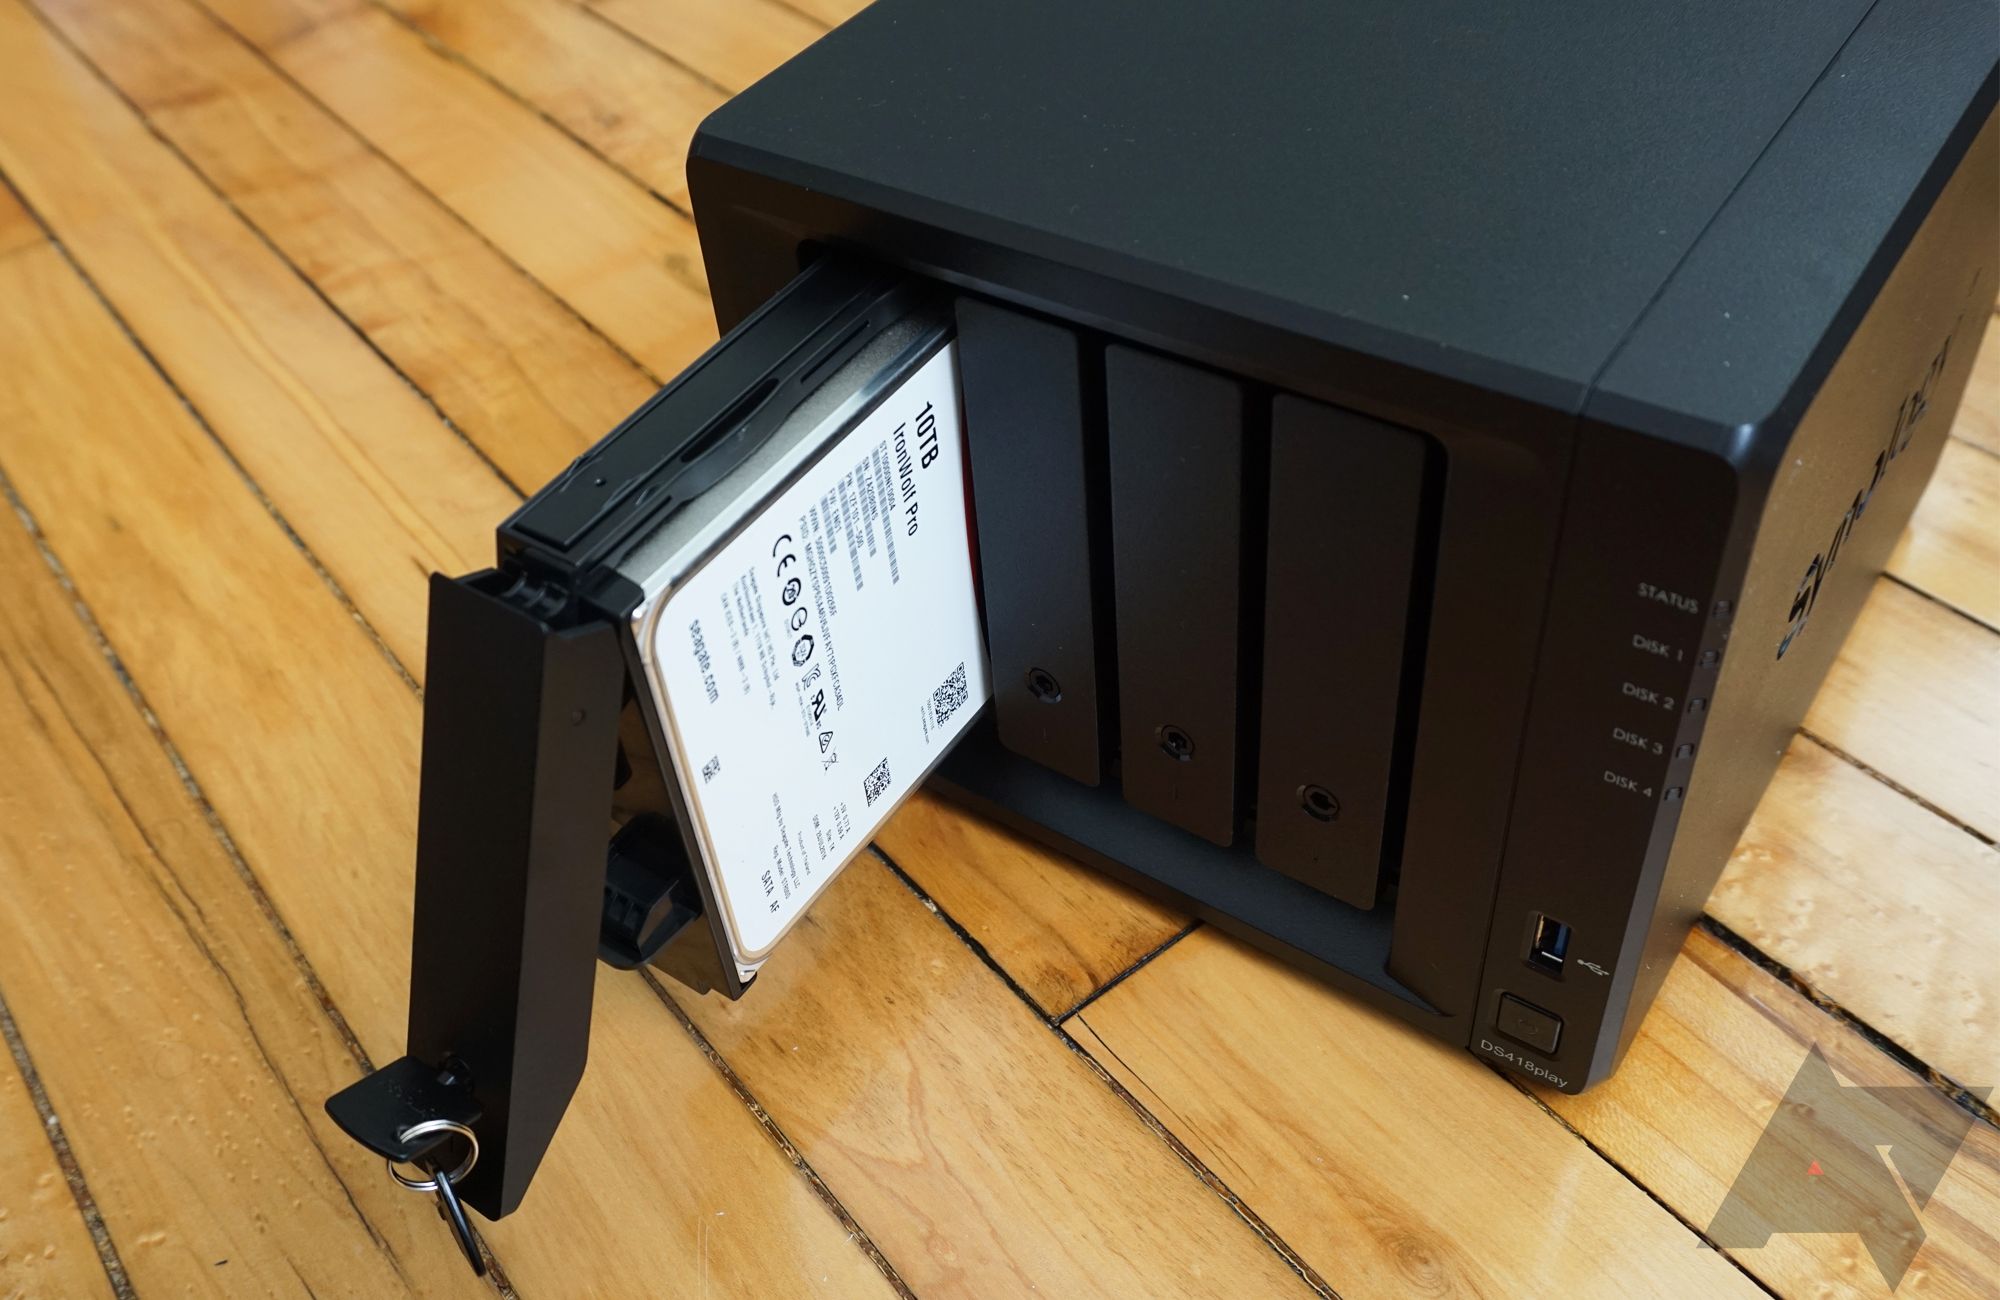 Image shows a NAS enclosure with one of its hard drives unlocked and sliding out.